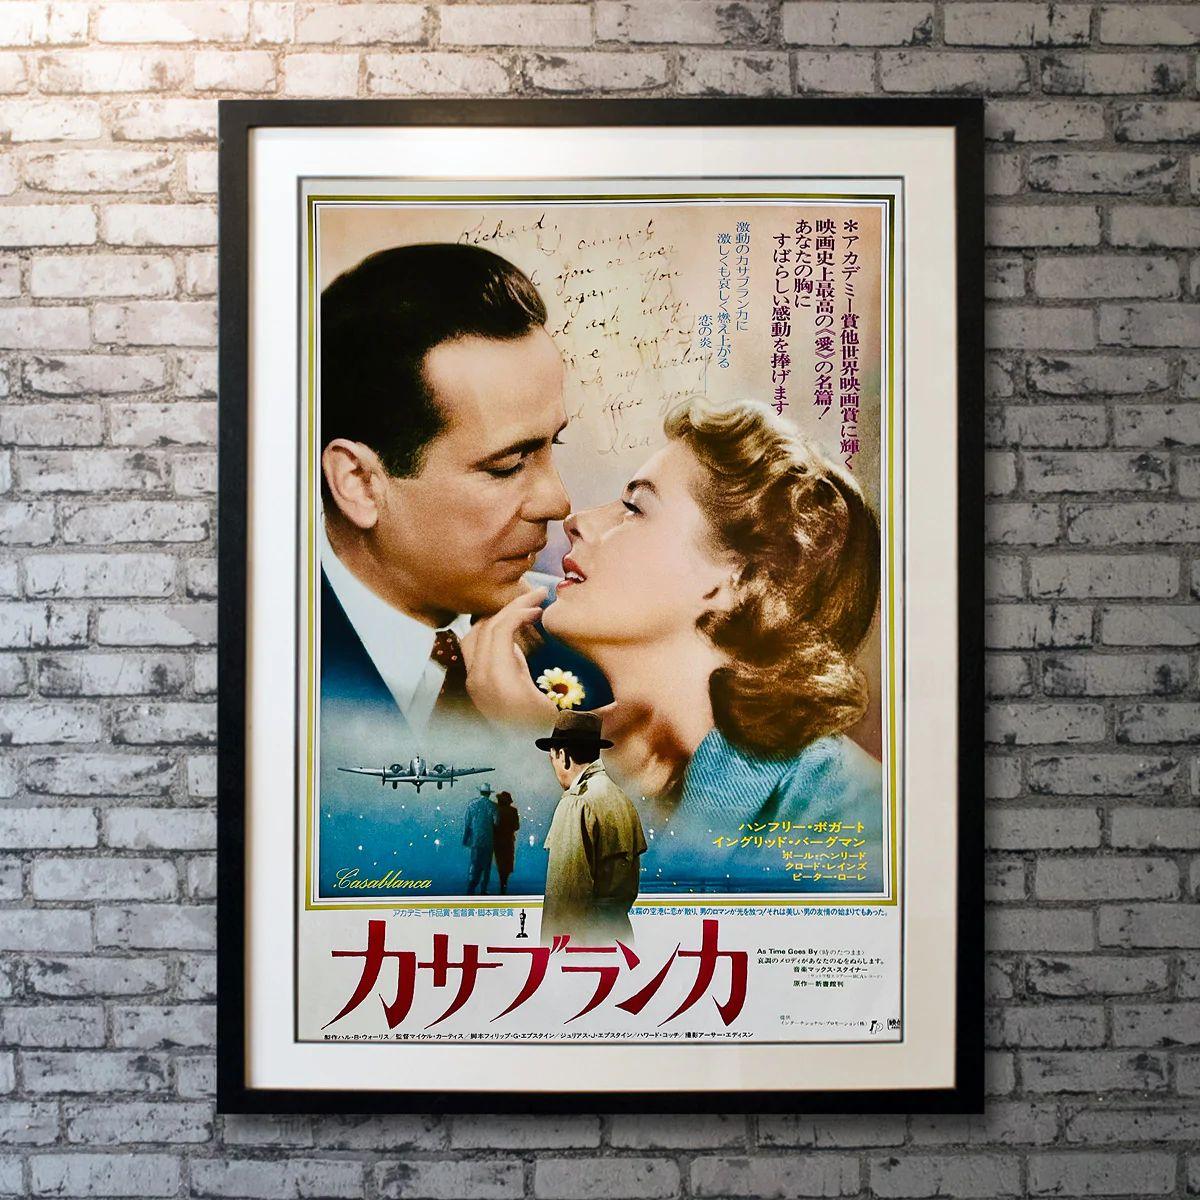 Casablanca, Unframed Poster with Linen Backing, 1974

Japanese B2 (20 x 29). This 1974 re-release Japanese poster features artwork not found on any other poster for this classic picture. Humphrey Bogart and Ingrid Bergman are shown against the